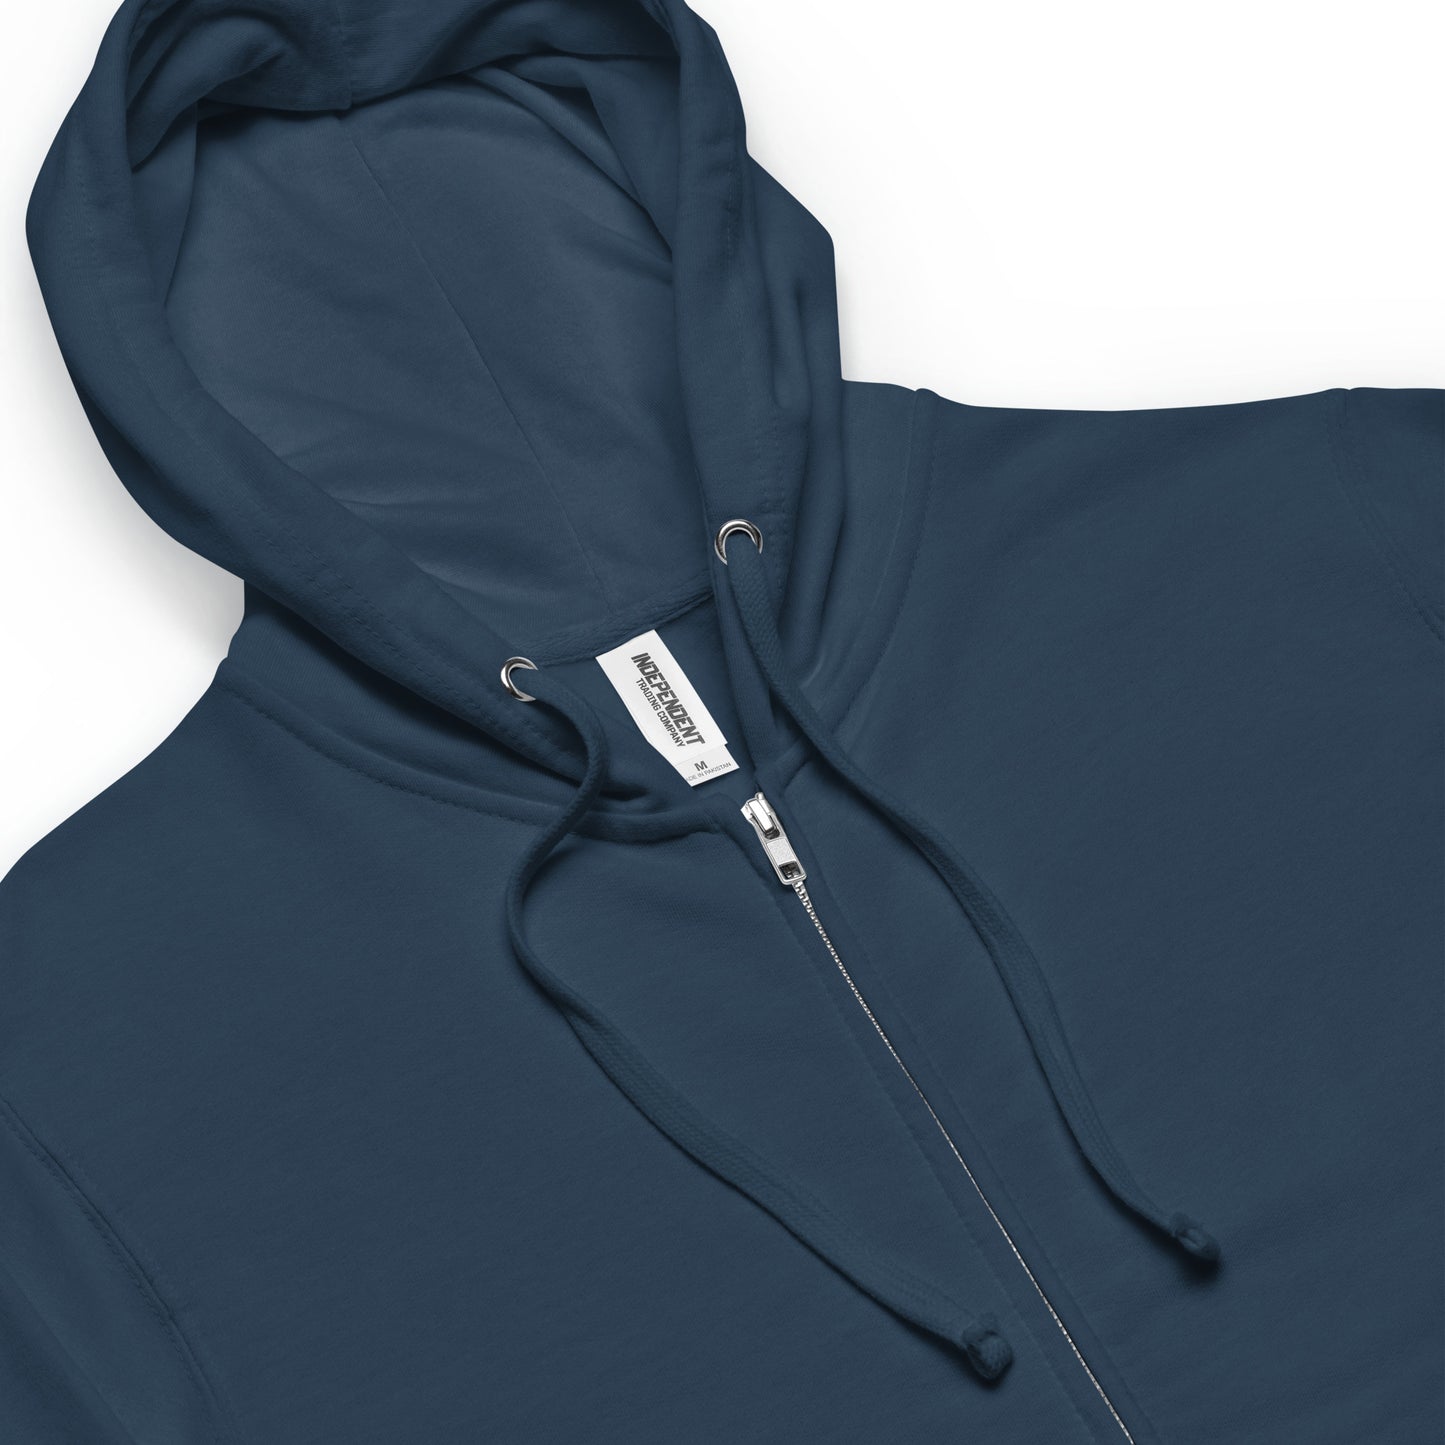 Unisex fleece zip-up hoodie navy colored. Details show jersey-lined hood, metal eyelets and zipper, and matching cords.